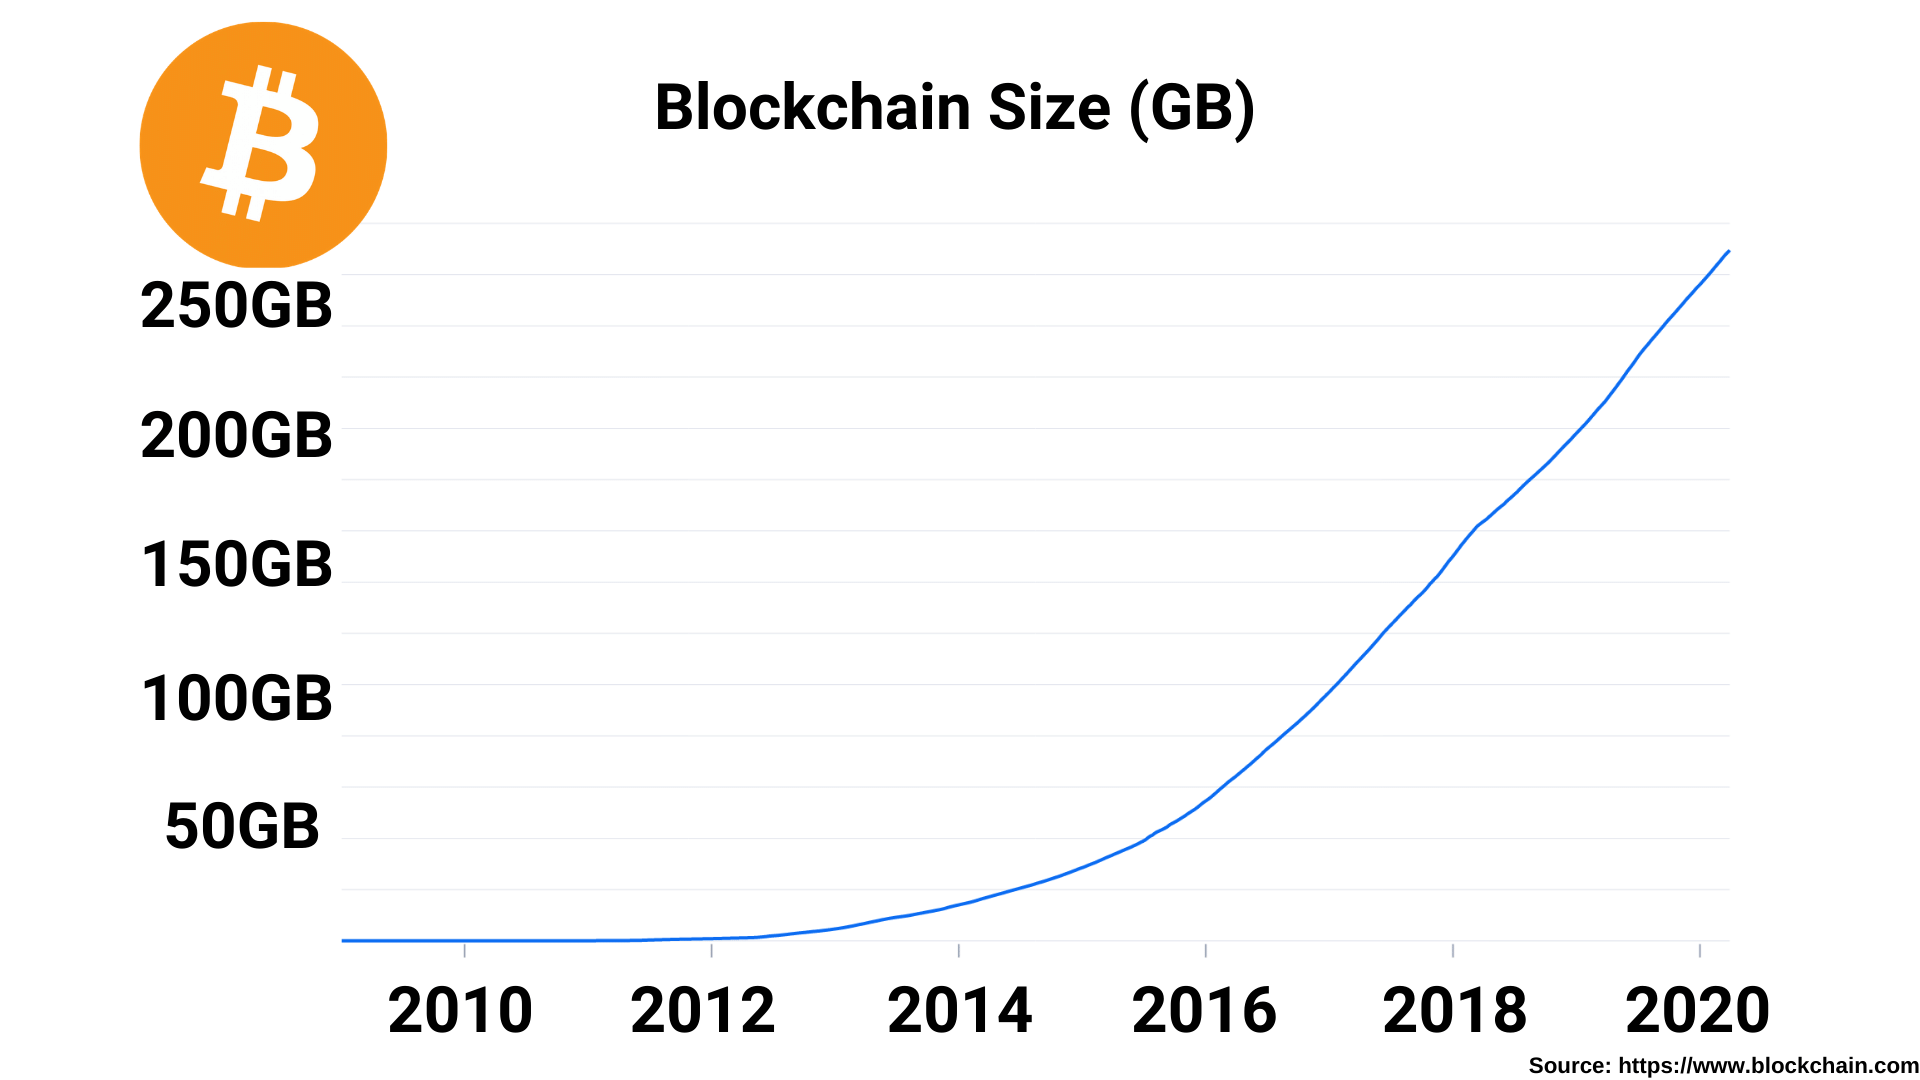 A graph showing the increase in size of the Bitcoin blockchain from 2009 to 2020 where it execeeds 250GB. It indciates that it reached 50GB in 2015, 100GB in 2016, 200GB in 2018 and 250GB in 2019.